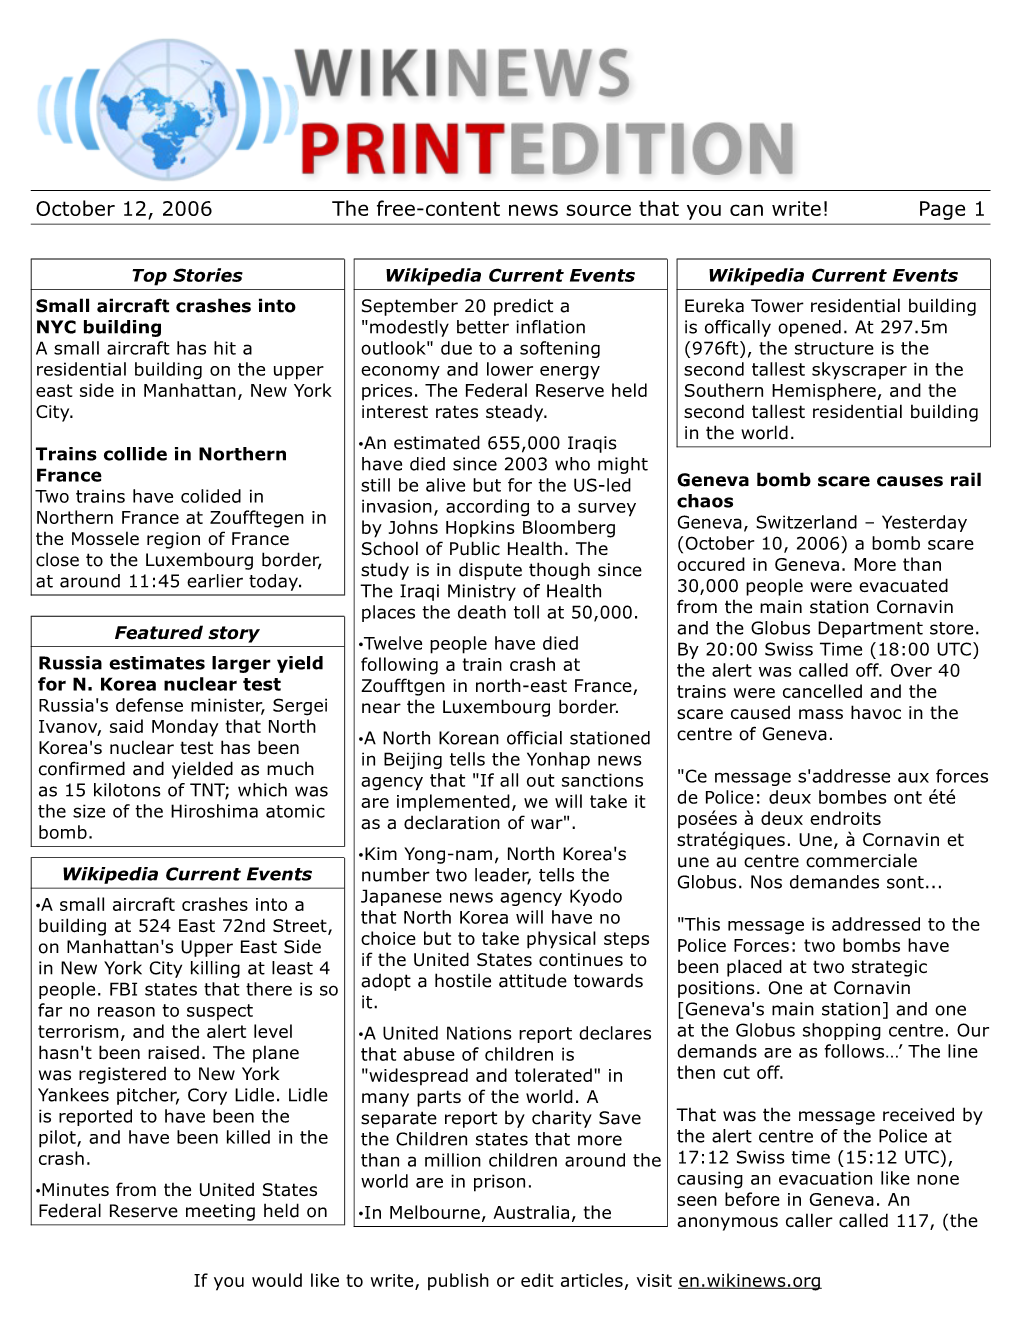 October 12, 2006 the Free-Content News Source That You Can Write! Page 1